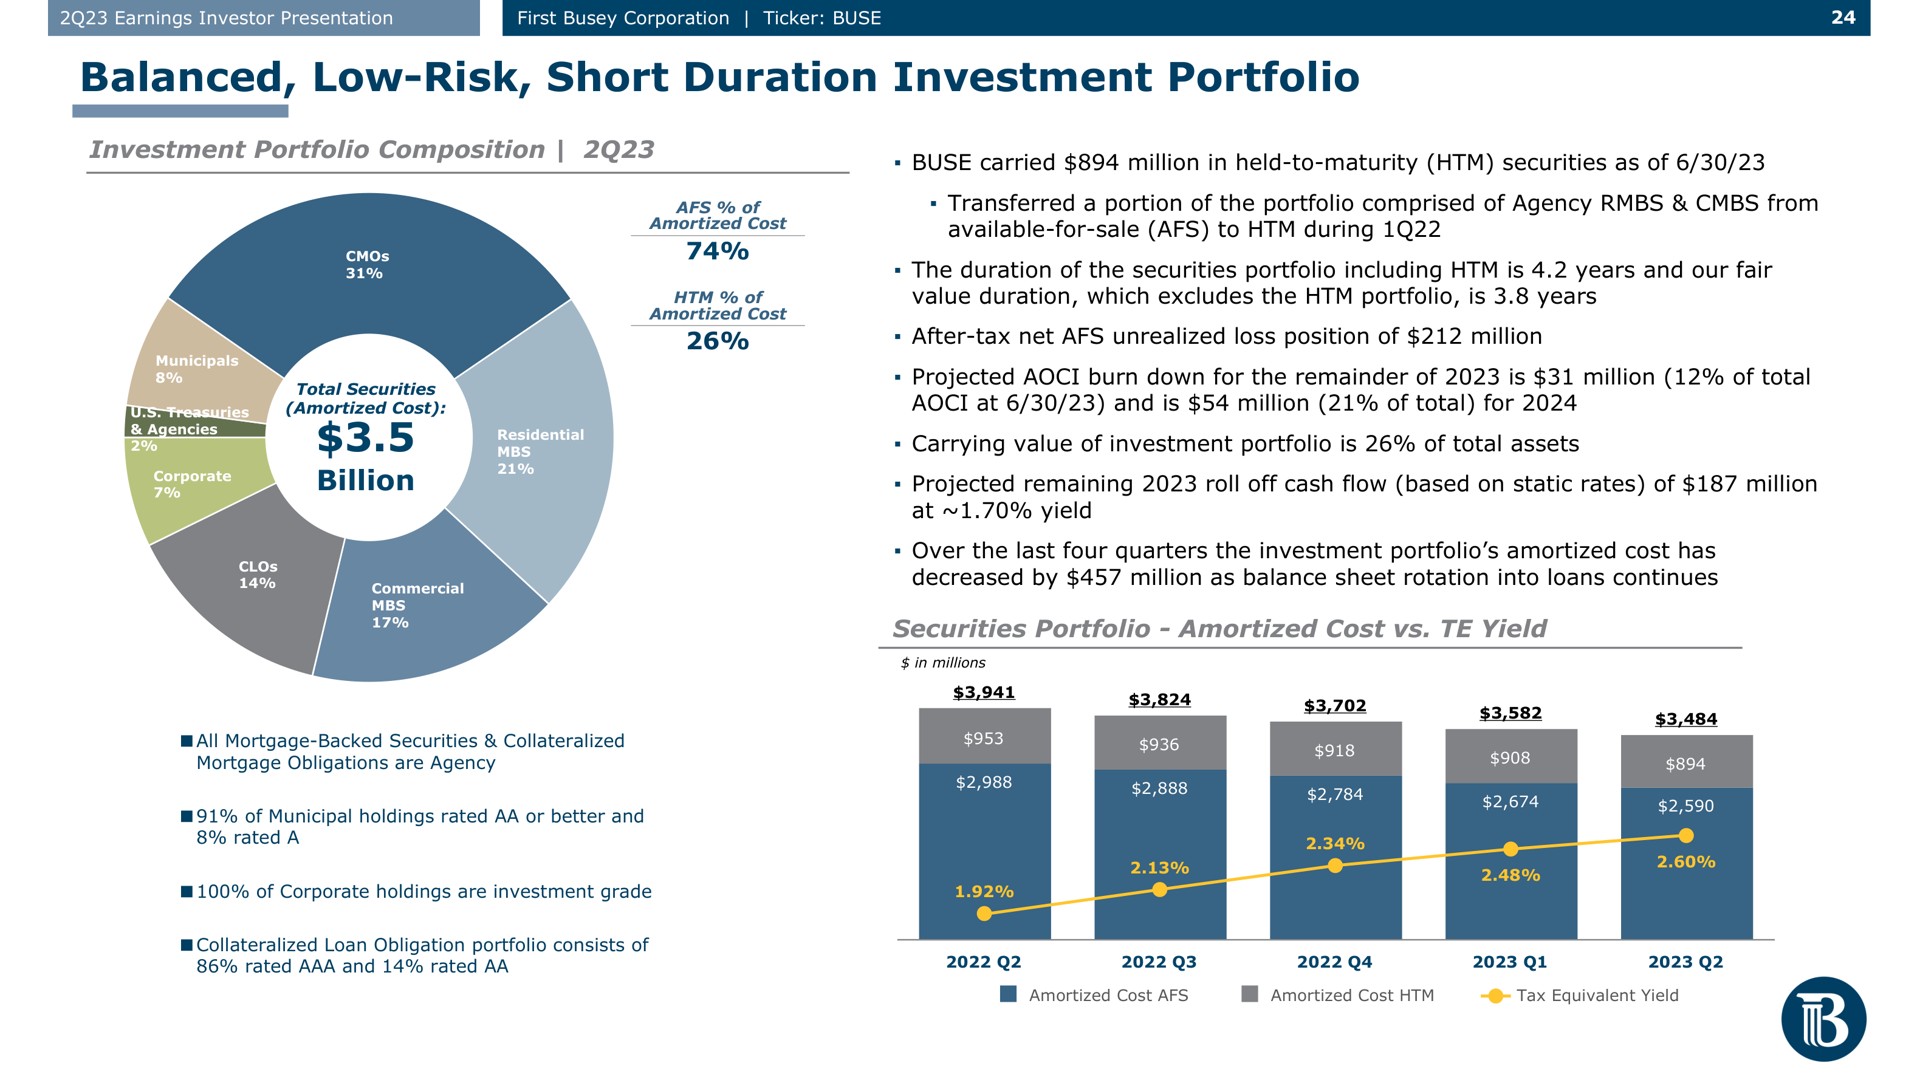 balanced low risk short duration investment portfolio investment portfolio composition billion securities portfolio amortized cost yield carried million in held to maturity as of available for sale to during projected remaining roll off cash flow based on static rates of million | First Busey